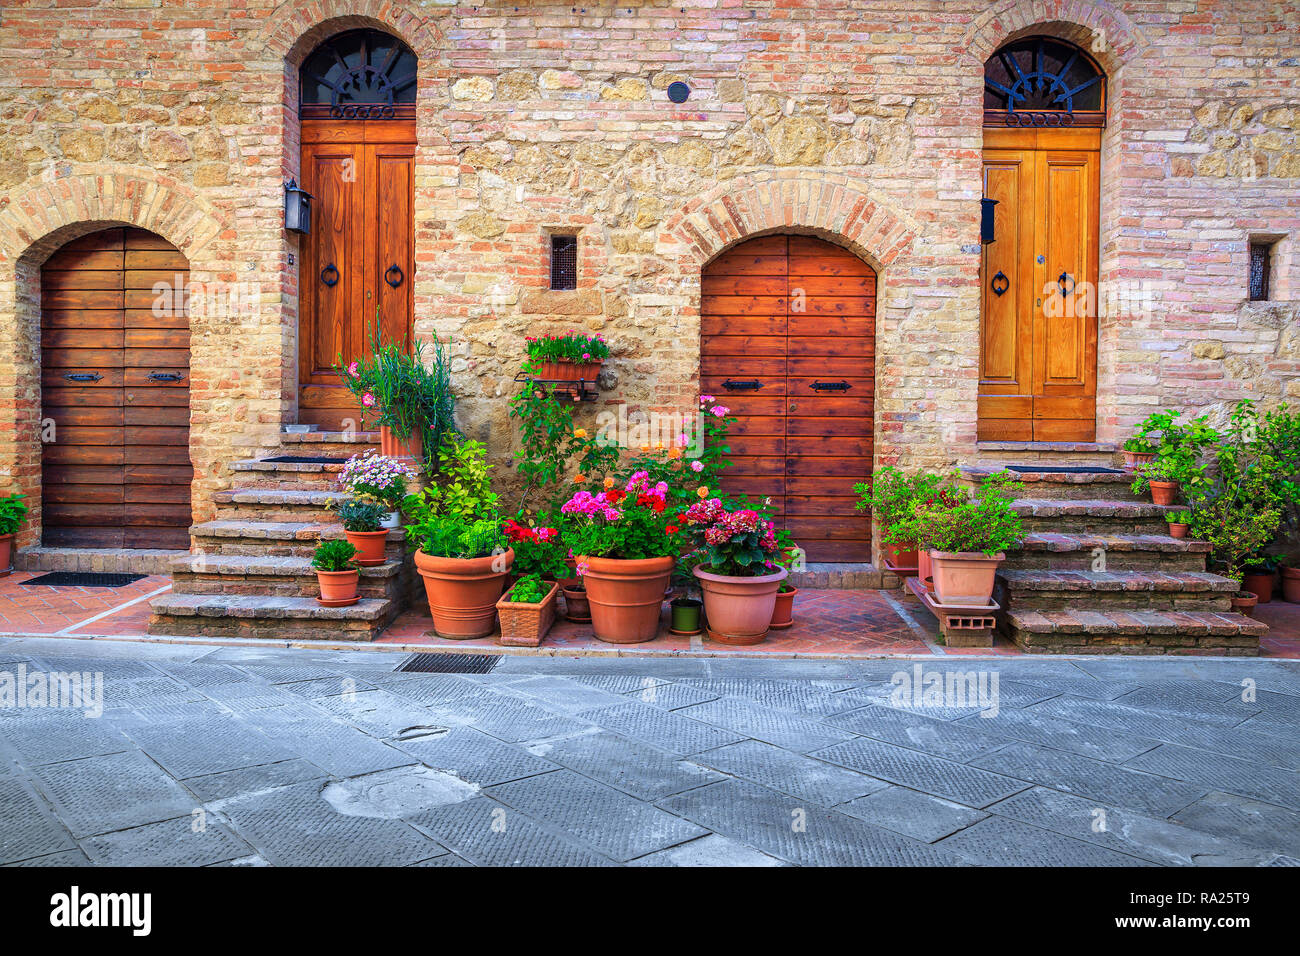 Traditional Tuscany architectural view. Fantastic entrance and paved street decorated with colorful flowers in Pienza, Tuscany, Italy, Europe Stock Photo